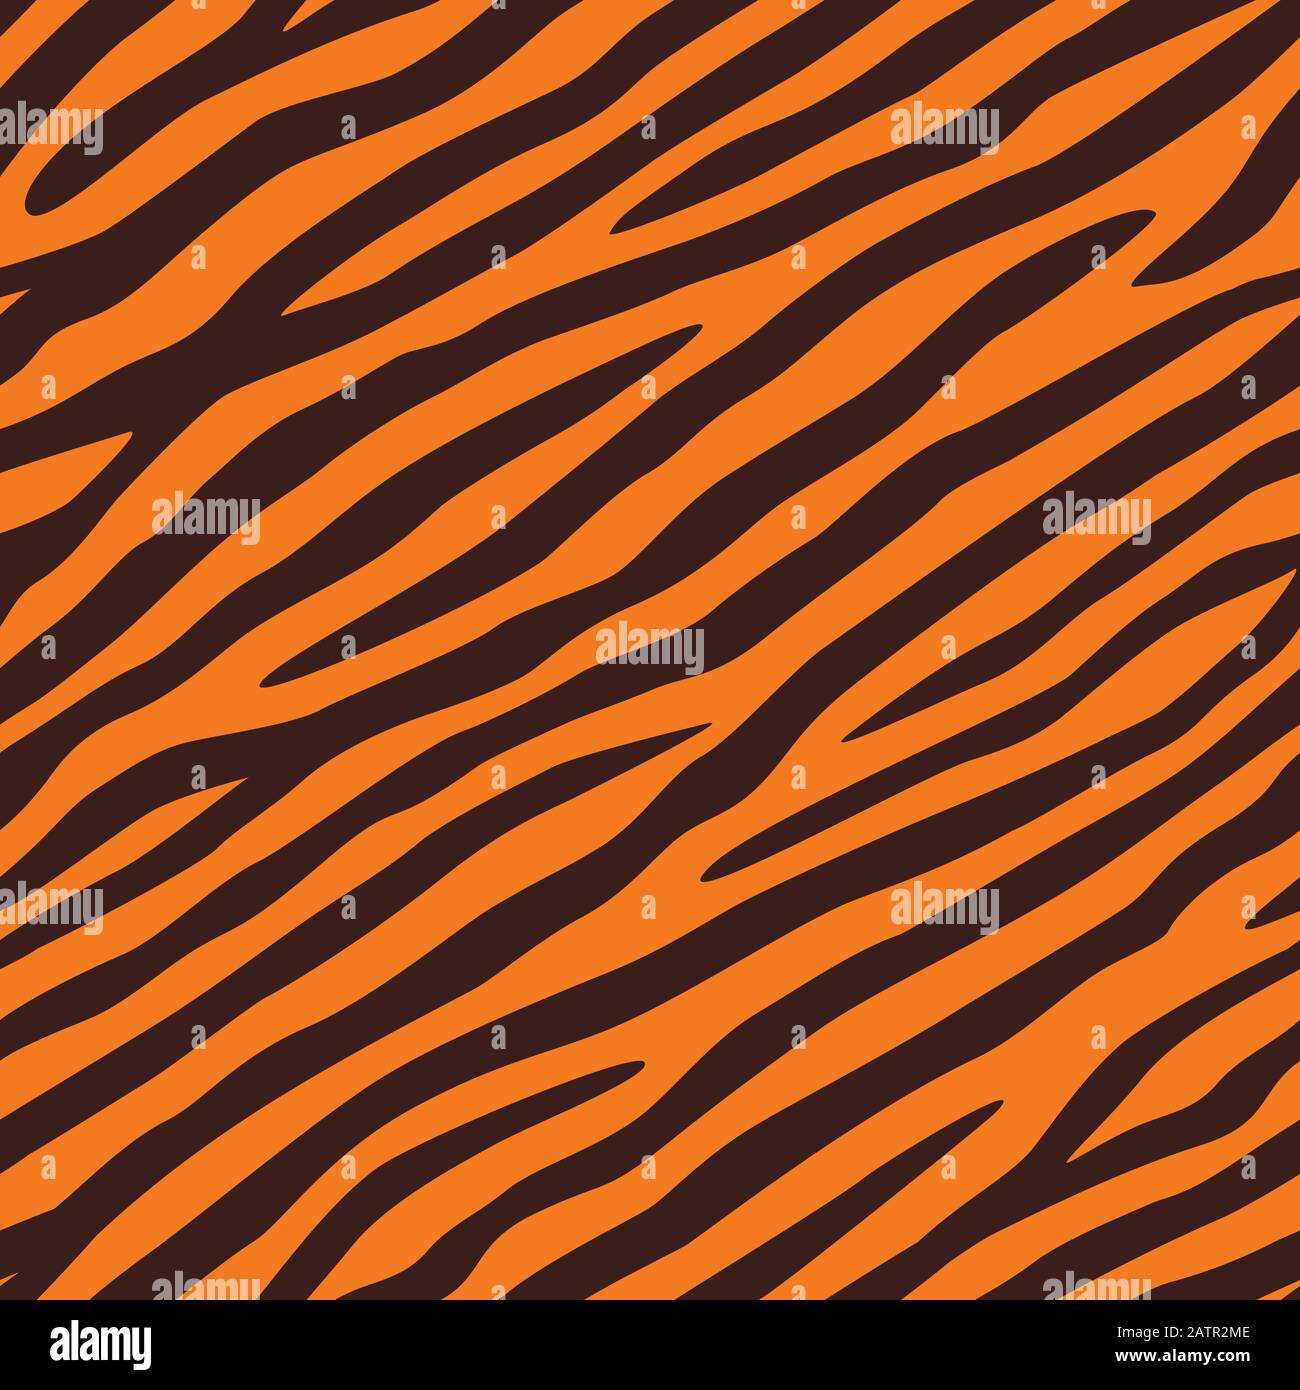 Tiger skin decoration Stock Vector Images - Alamy